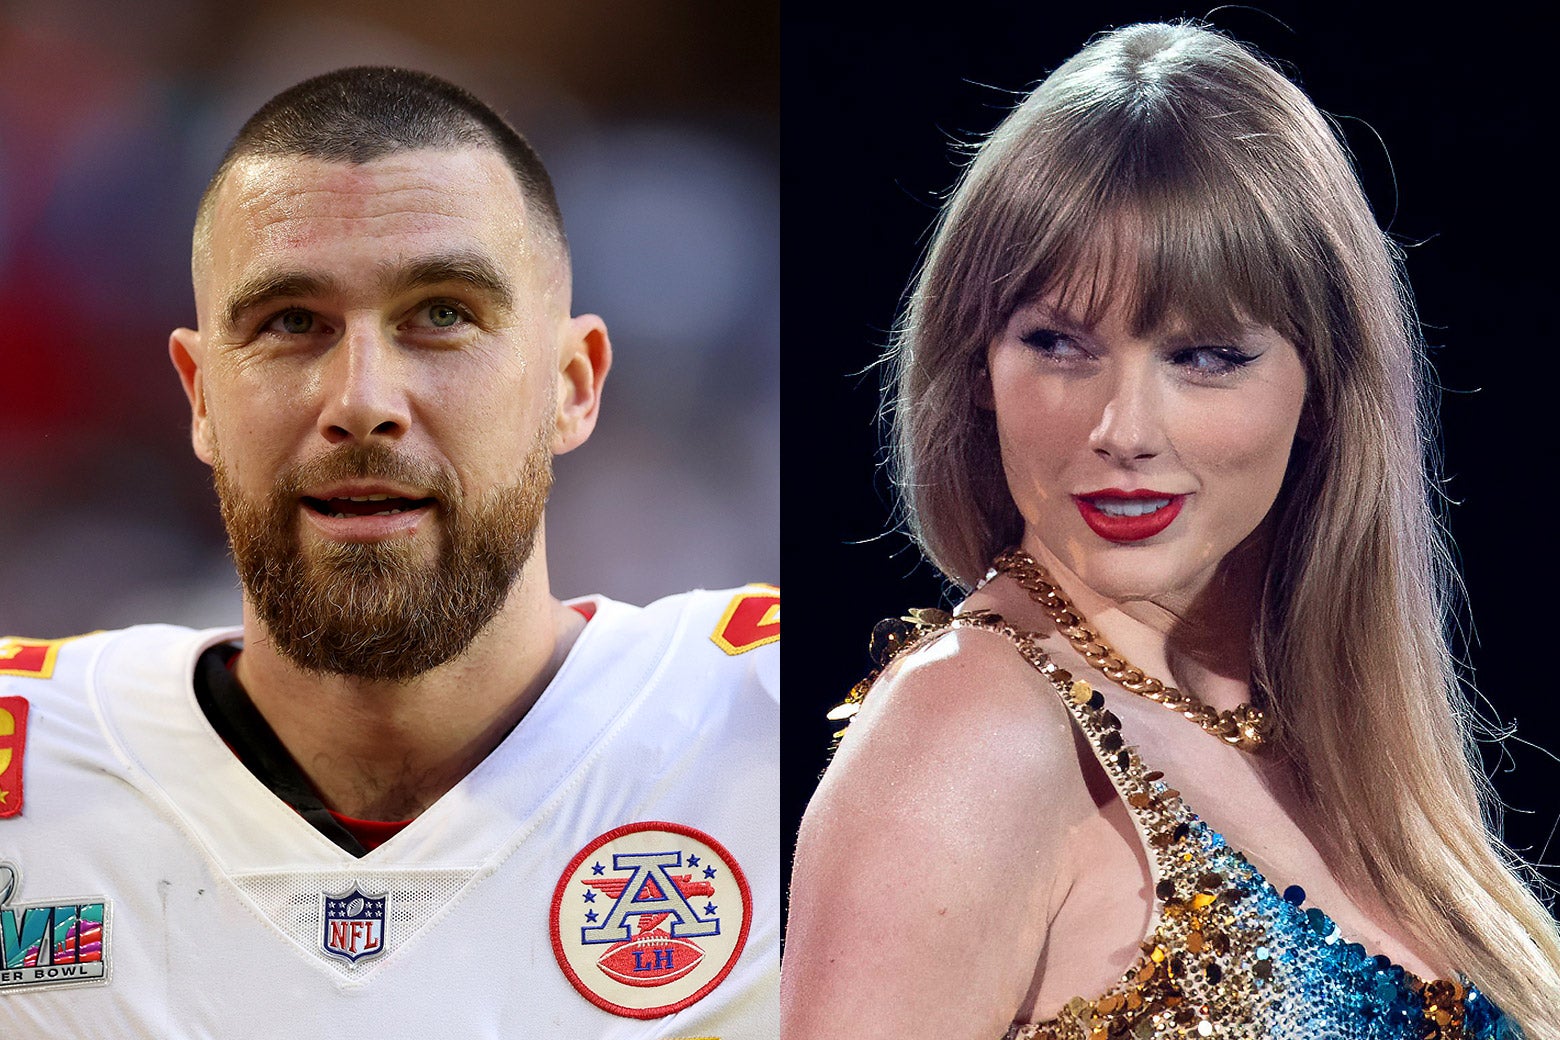 Side by side: Travis Kelce and Taylor Swift.